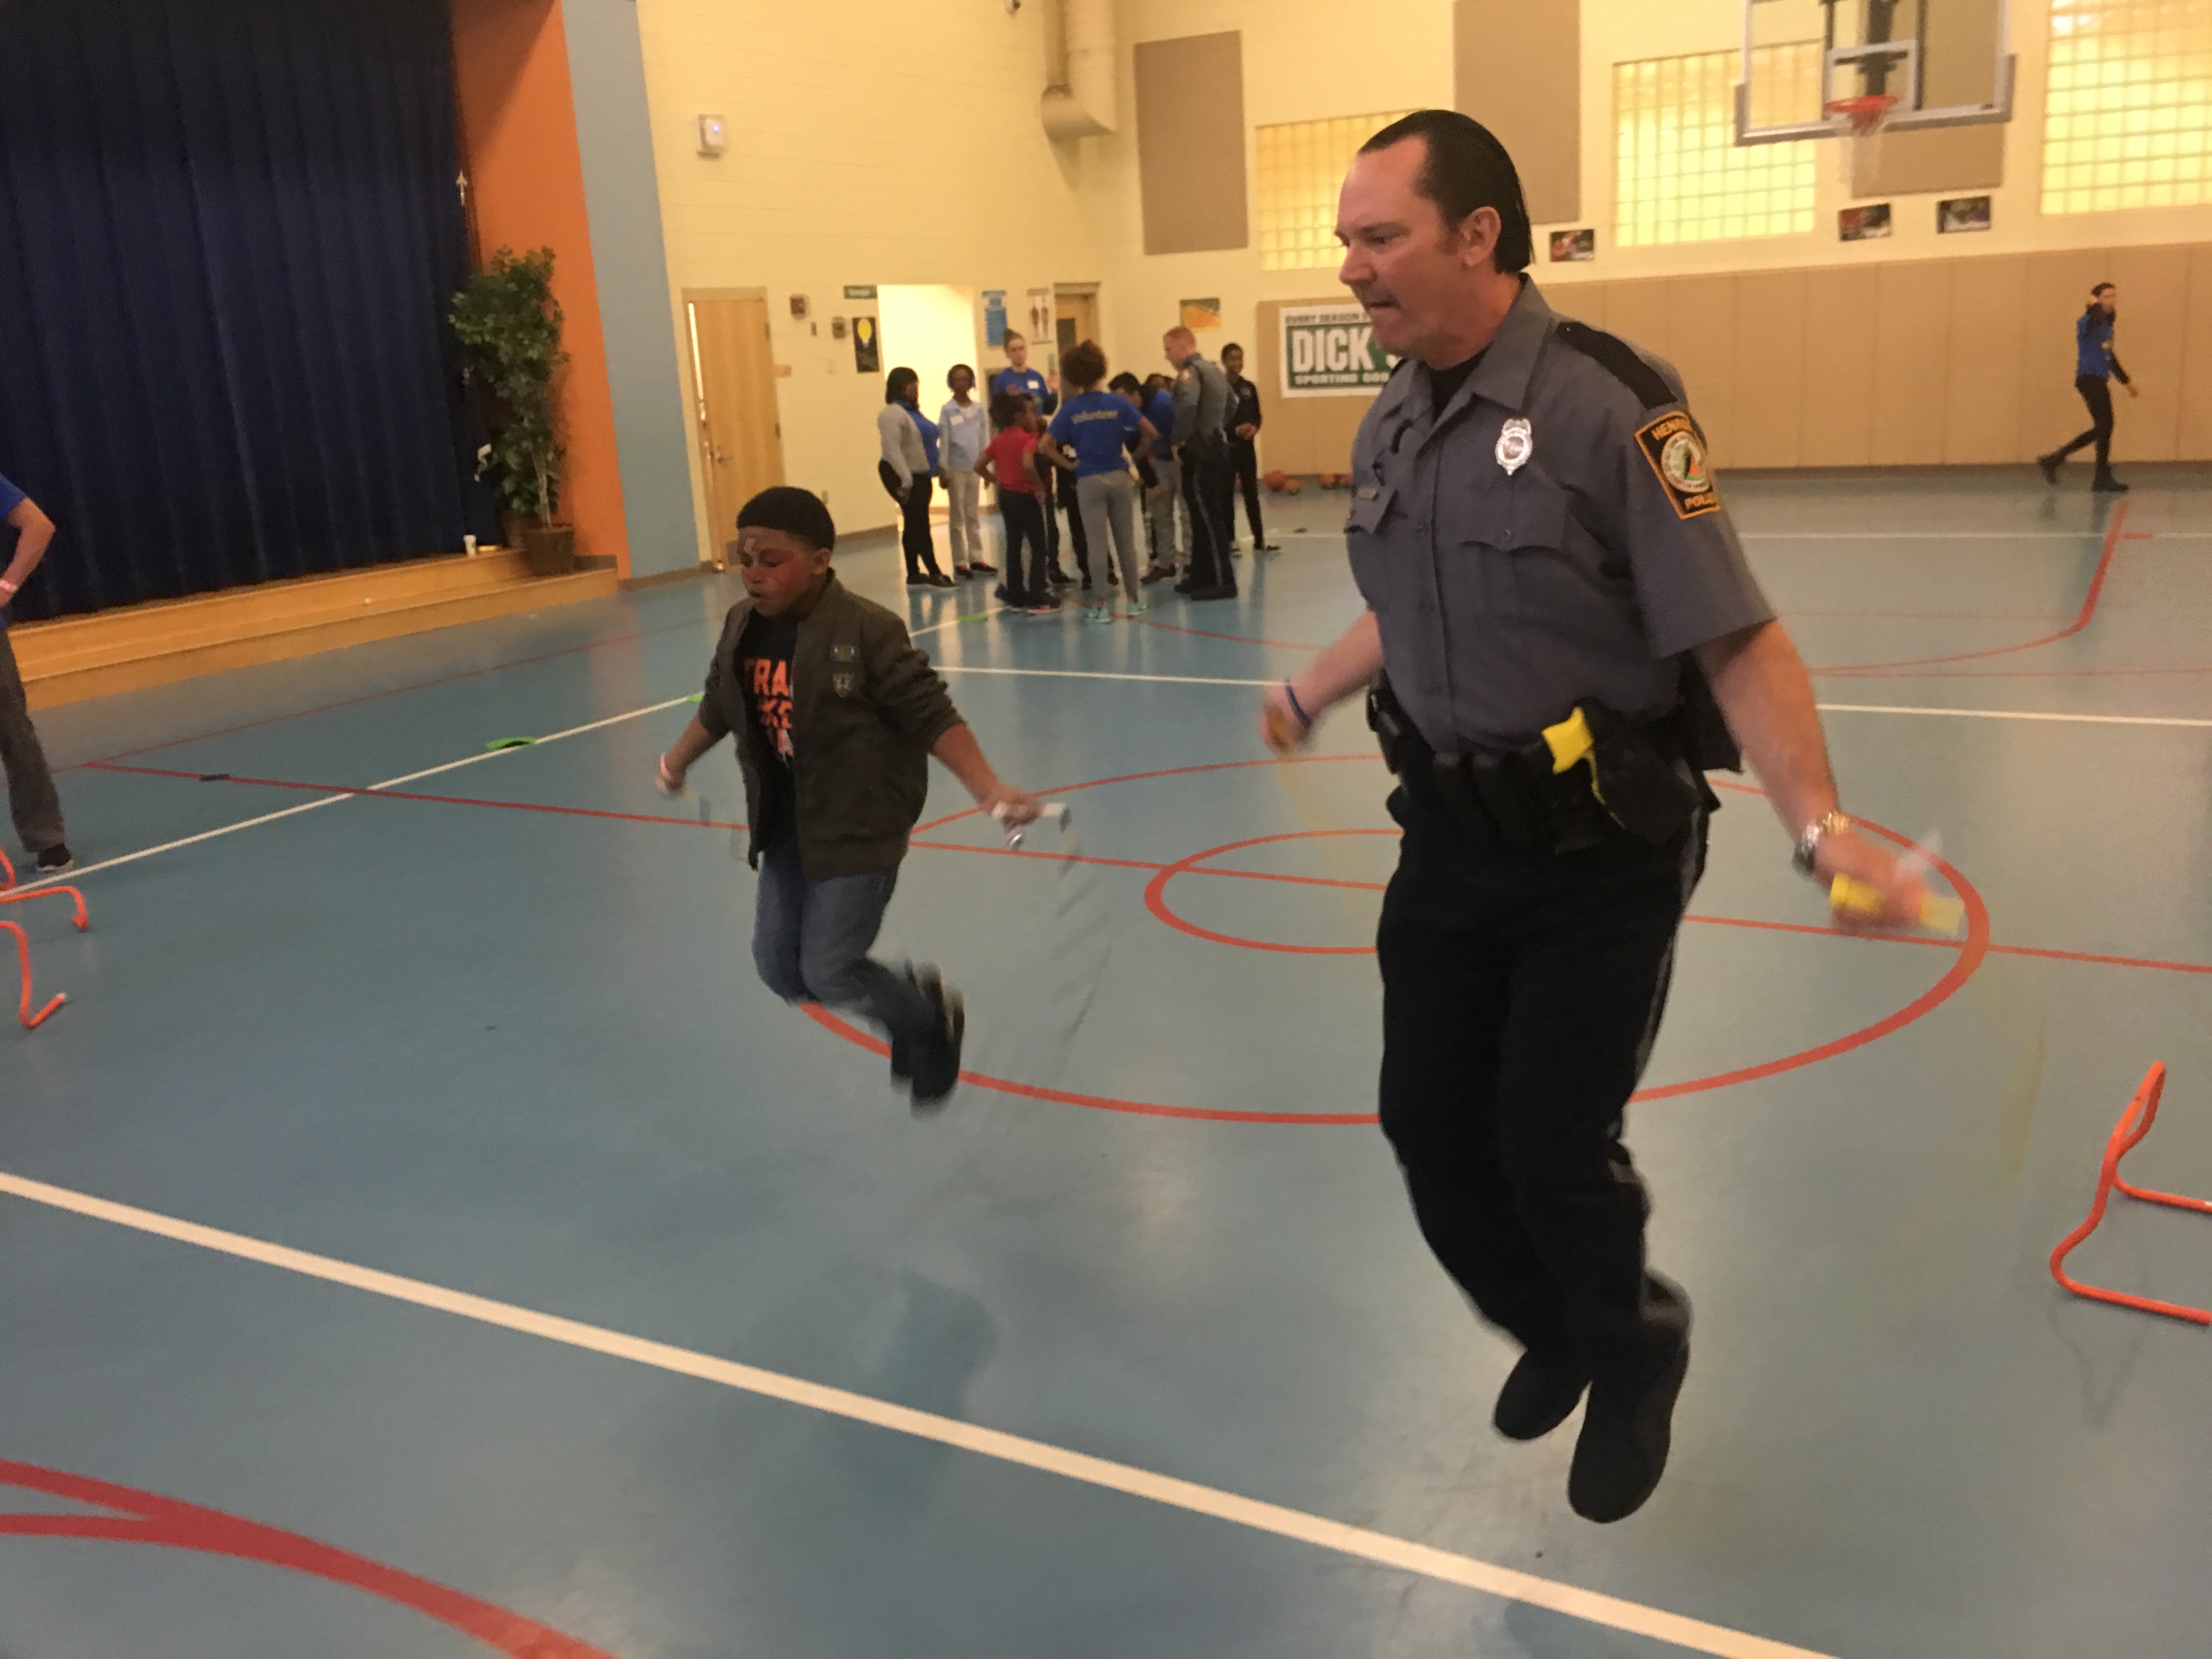 police officer jumping rope with a kid